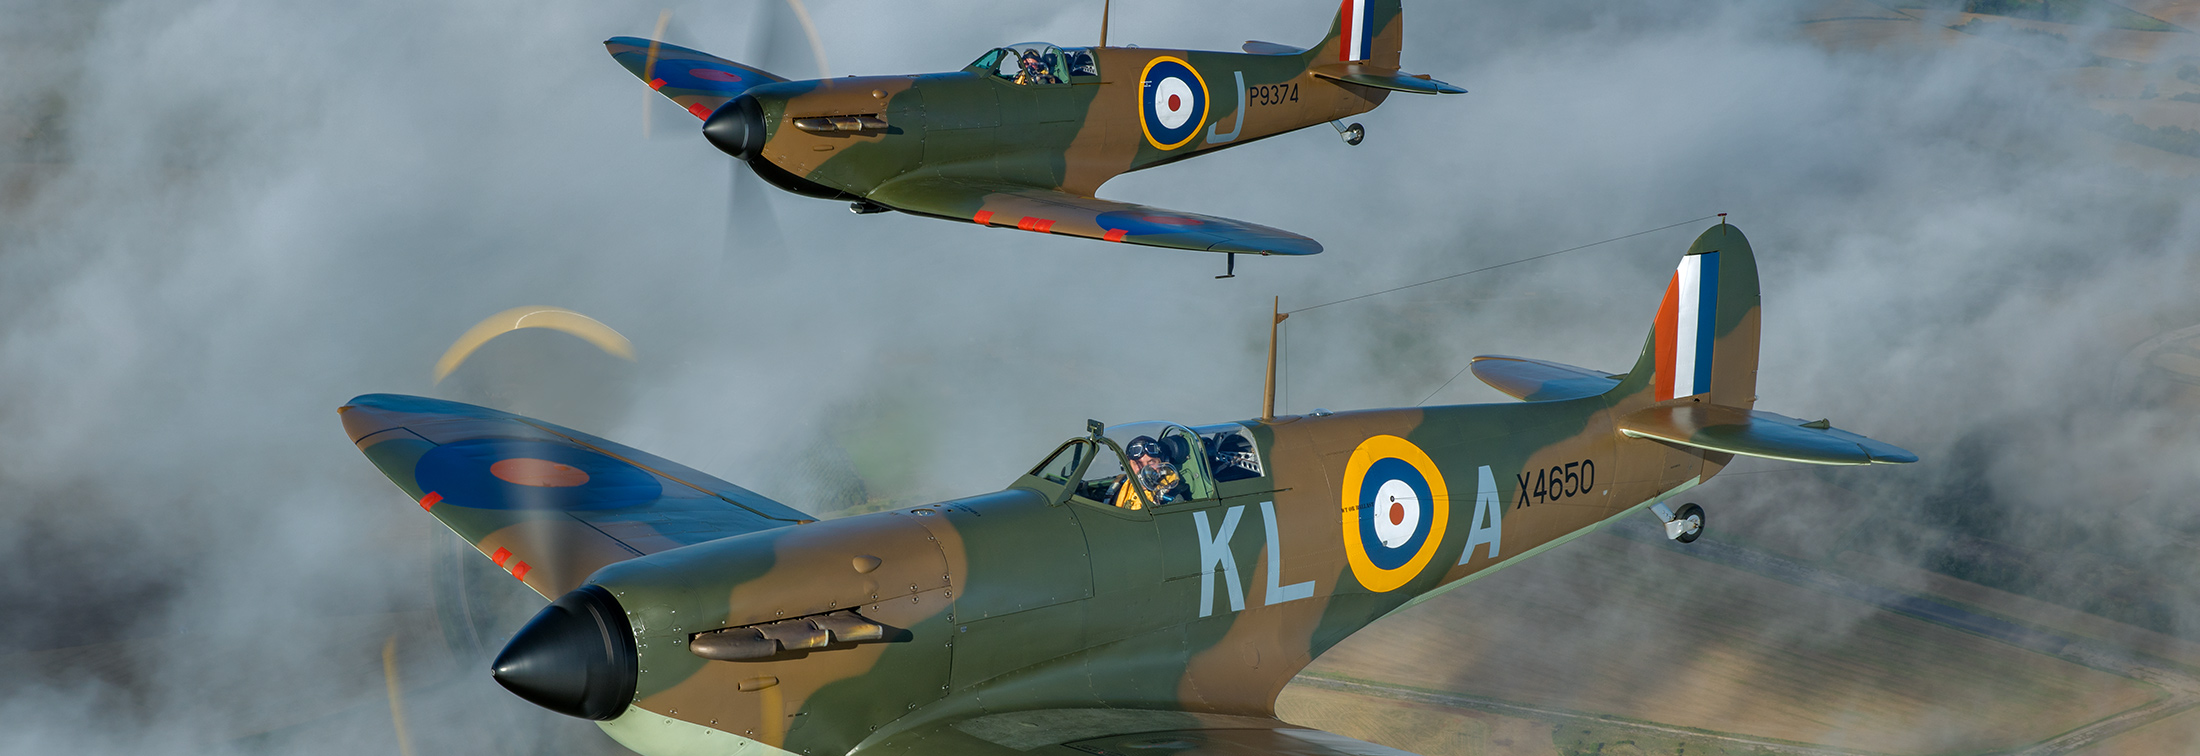 Spitfire - A gripping look back at a crucial point in history